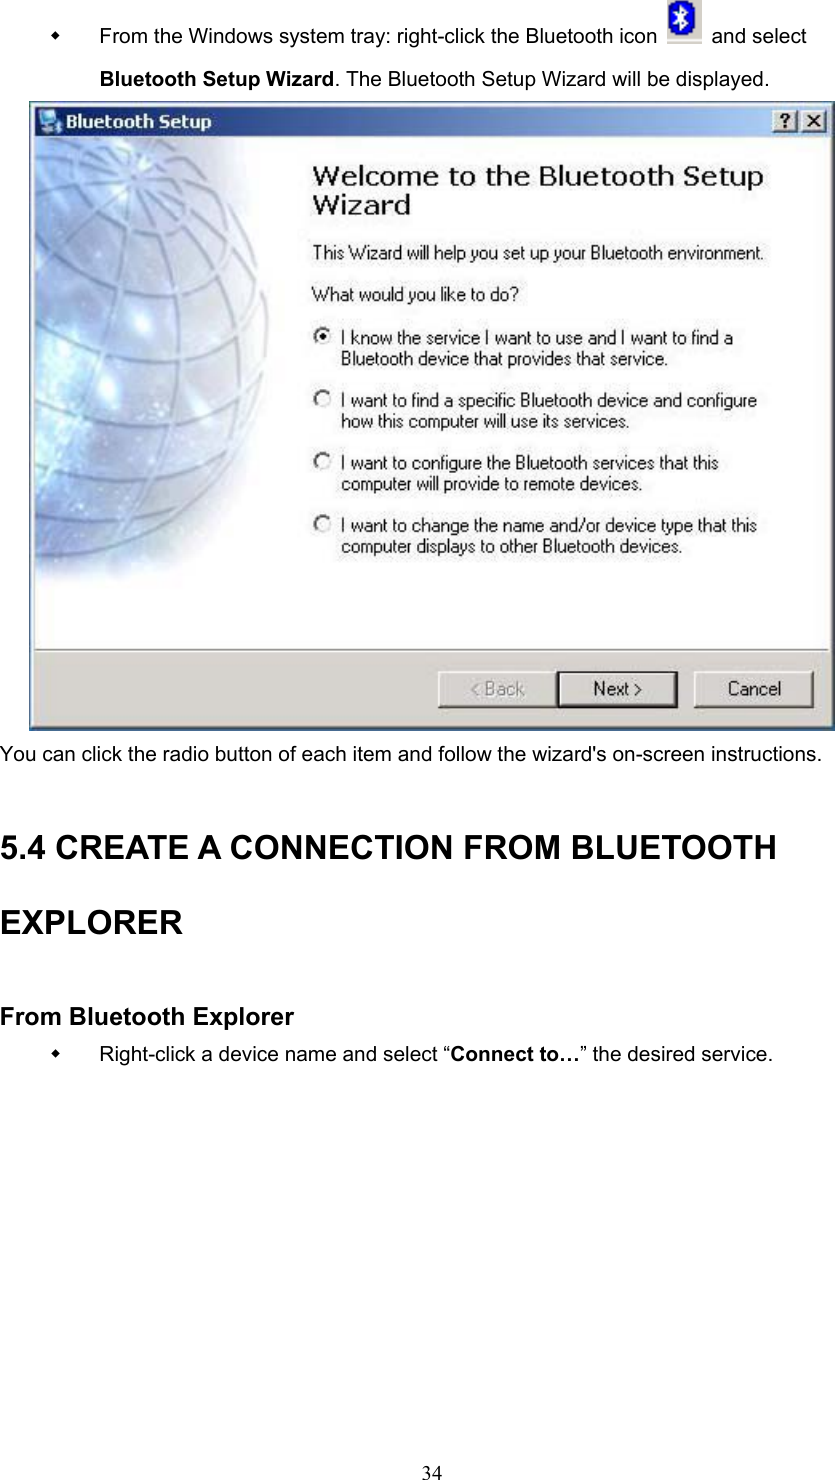  34   From the Windows system tray: right-click the Bluetooth icon   and select Bluetooth Setup Wizard. The Bluetooth Setup Wizard will be displayed.  You can click the radio button of each item and follow the wizard&apos;s on-screen instructions.  5.4 CREATE A CONNECTION FROM BLUETOOTH EXPLORER  From Bluetooth Explorer   Right-click a device name and select “Connect to…” the desired service.  